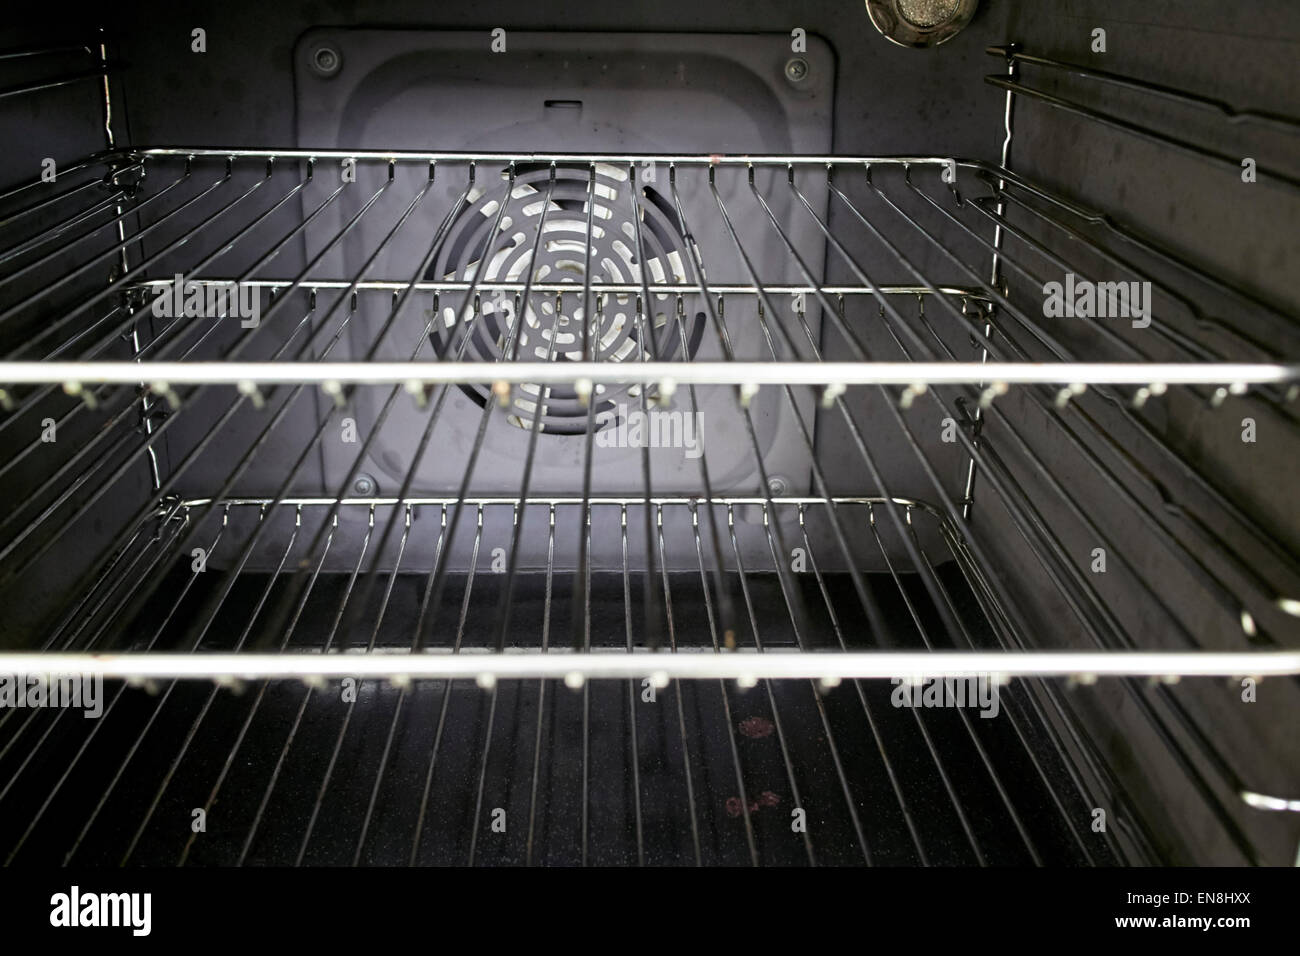 interior of a home kitchen fan assisted oven with clean metal grill shelves Stock Photo